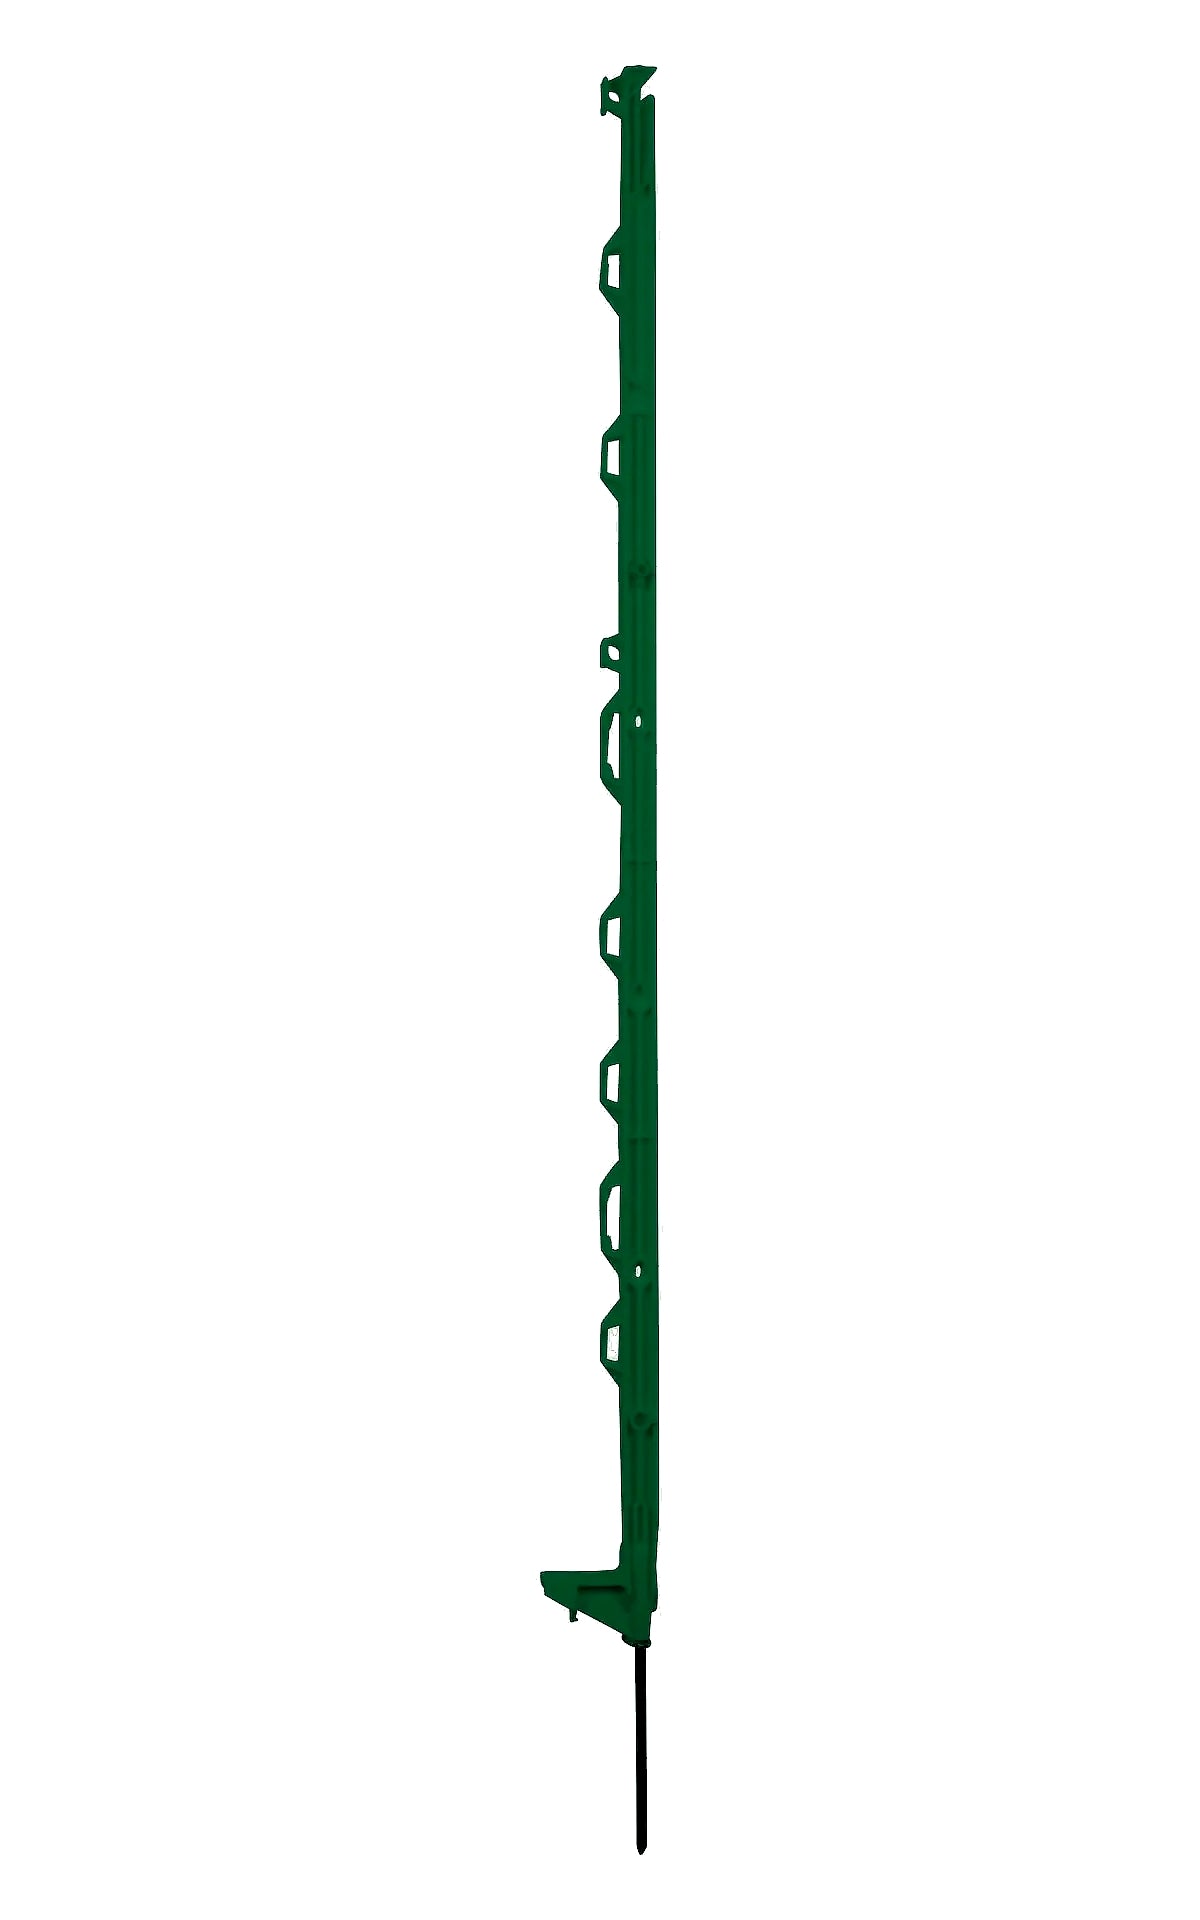 Hotline - Green Plastic Electric Fence Posts 104cm (10 Pack)